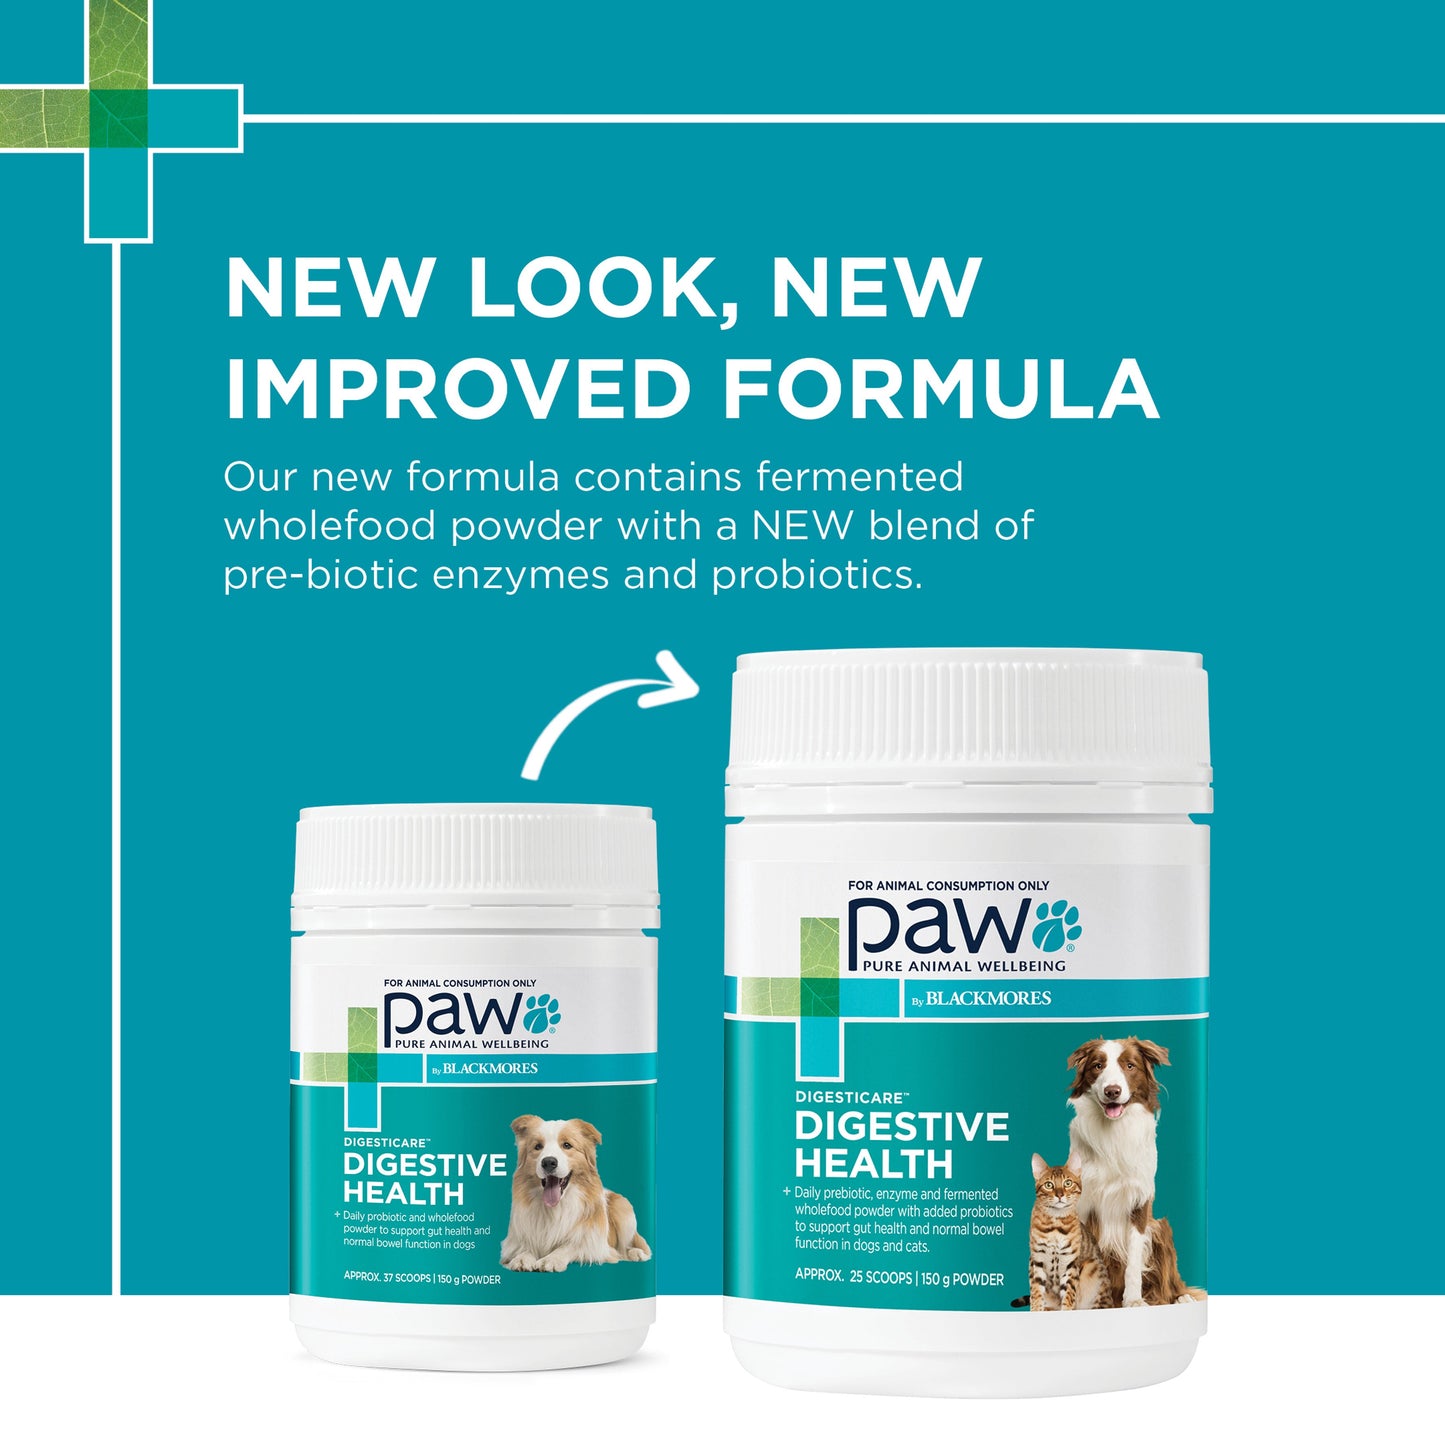 PAW Digesticare for Dogs and Cats